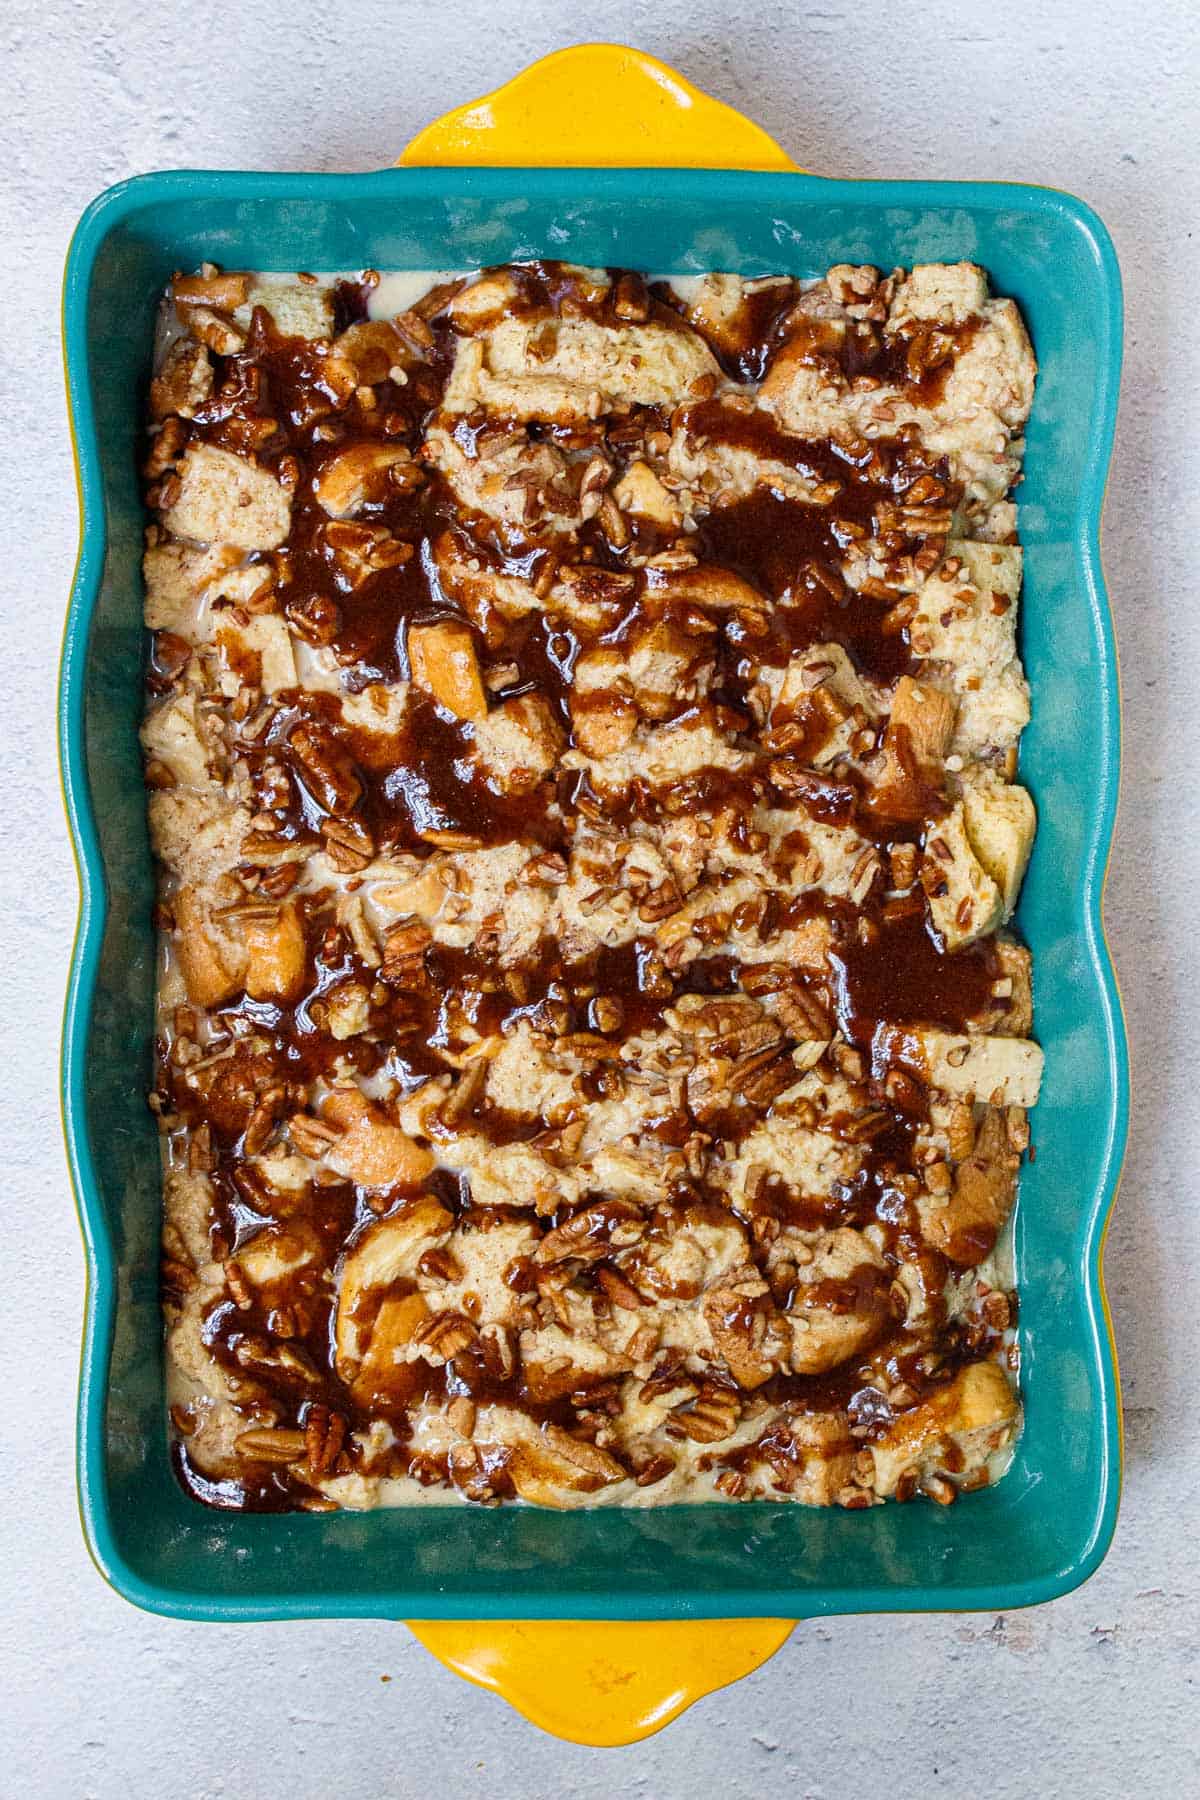 Brown sugar butter mixture drizzled over French toast casserole.